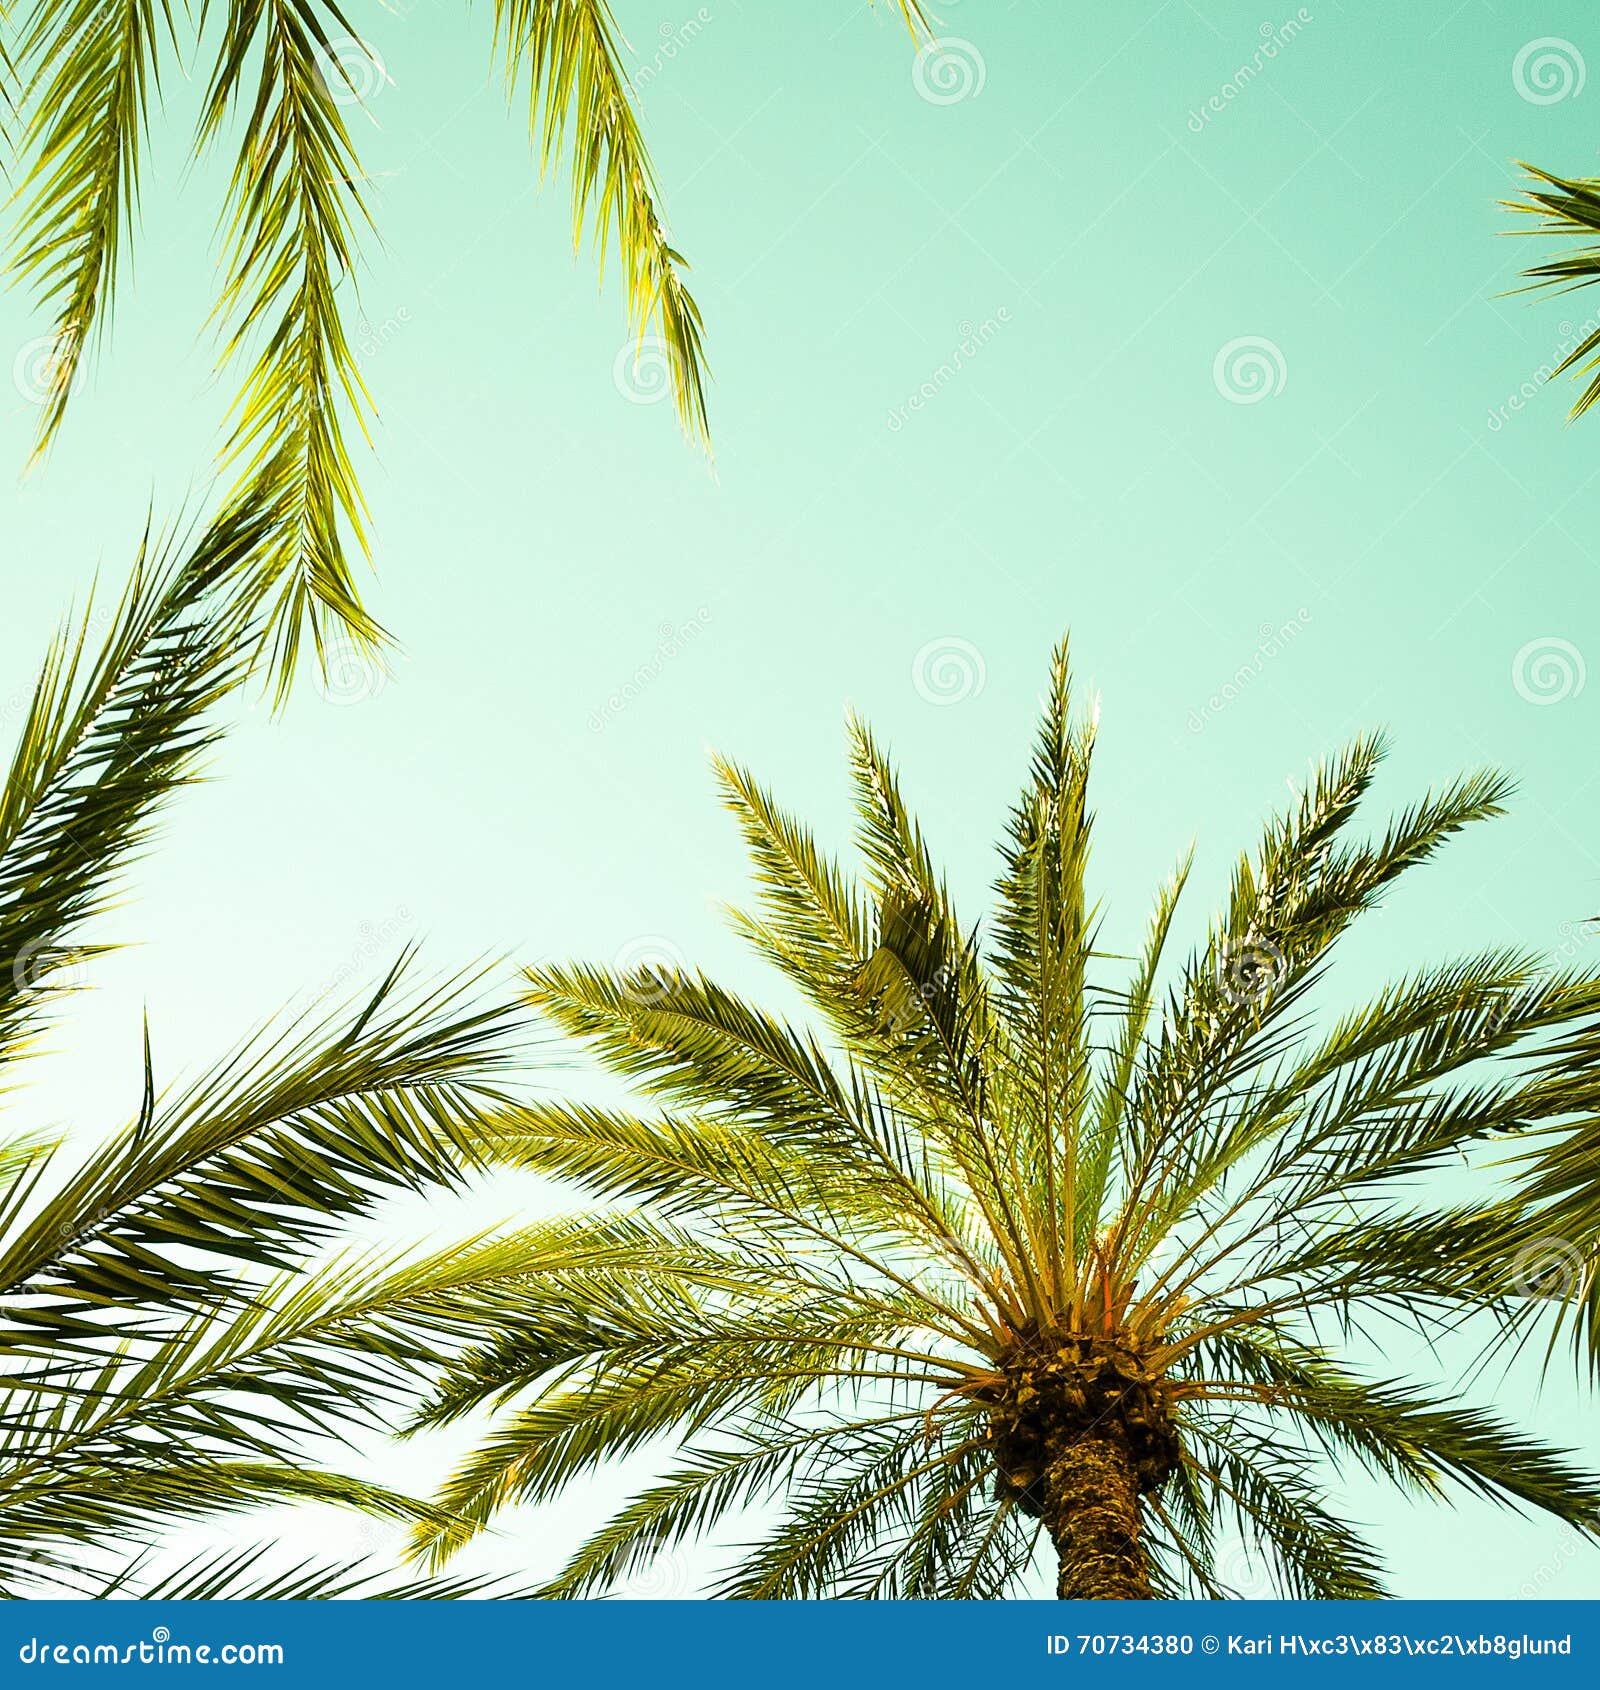 Vintage Palm Tree and Palm Leafs Against the Sky Stock Photo - Image of ...